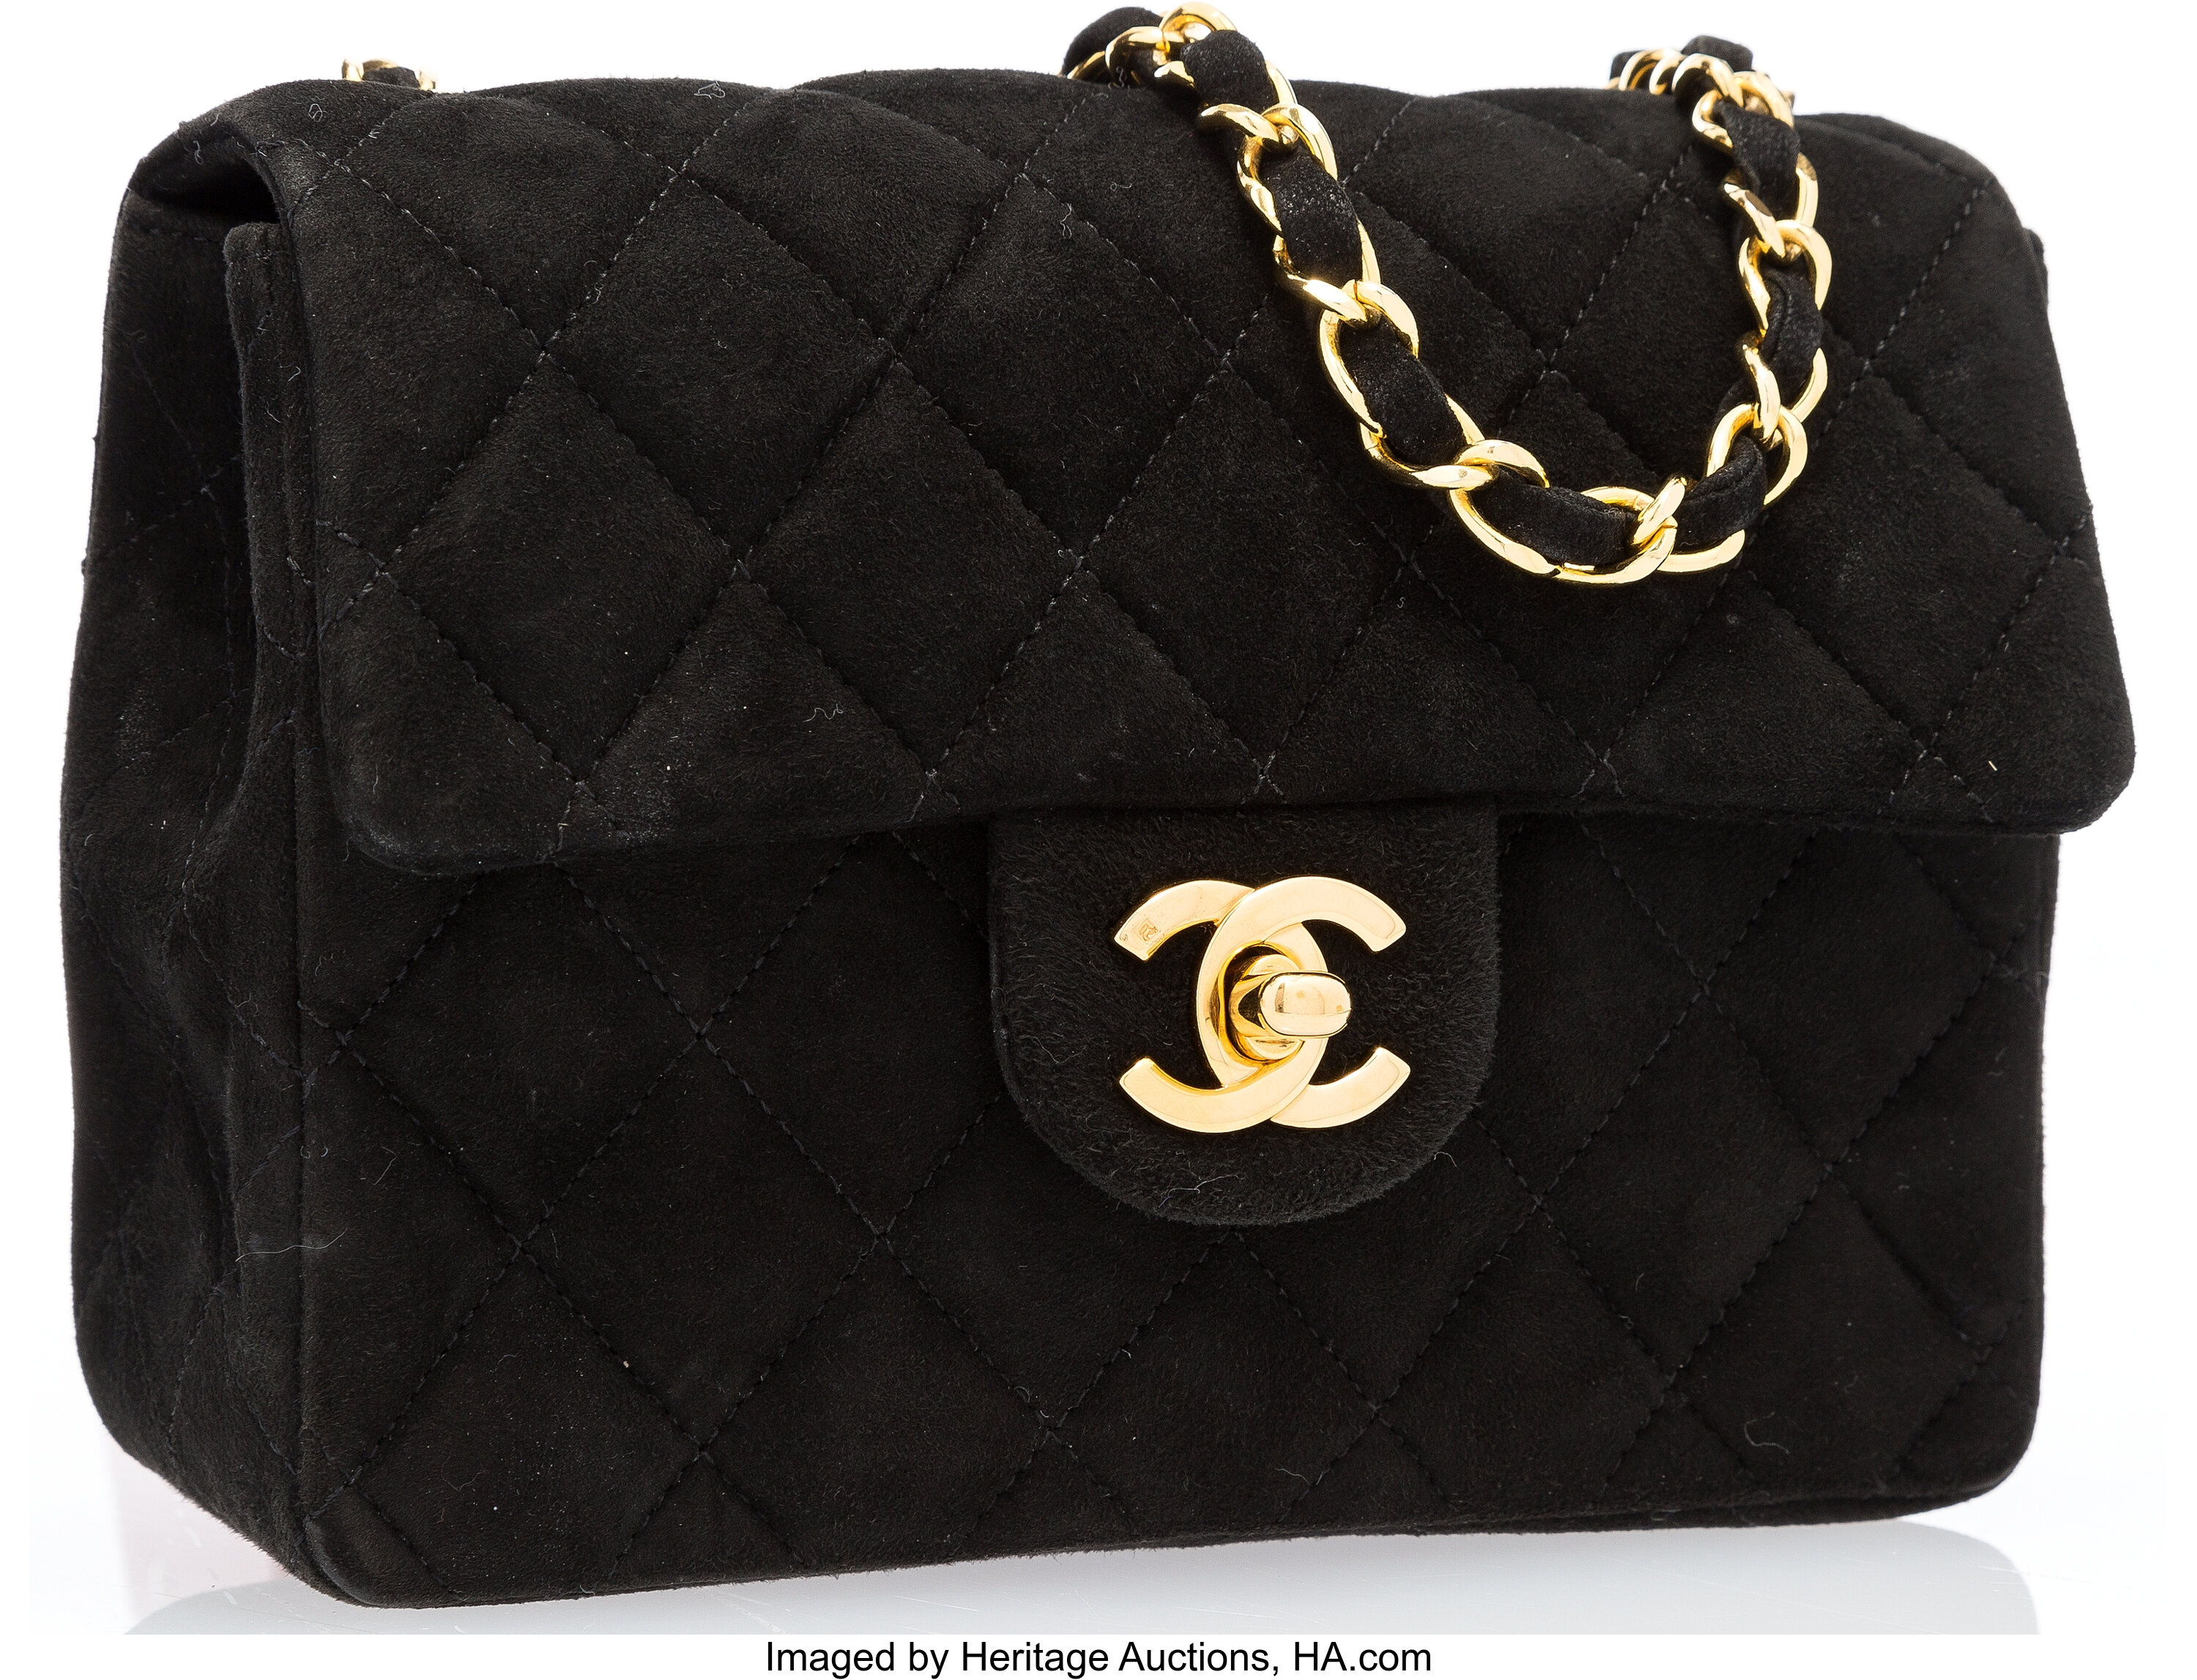 Chanel Black Quilted Suede Mini Single Flap Bag with Gold Hardware